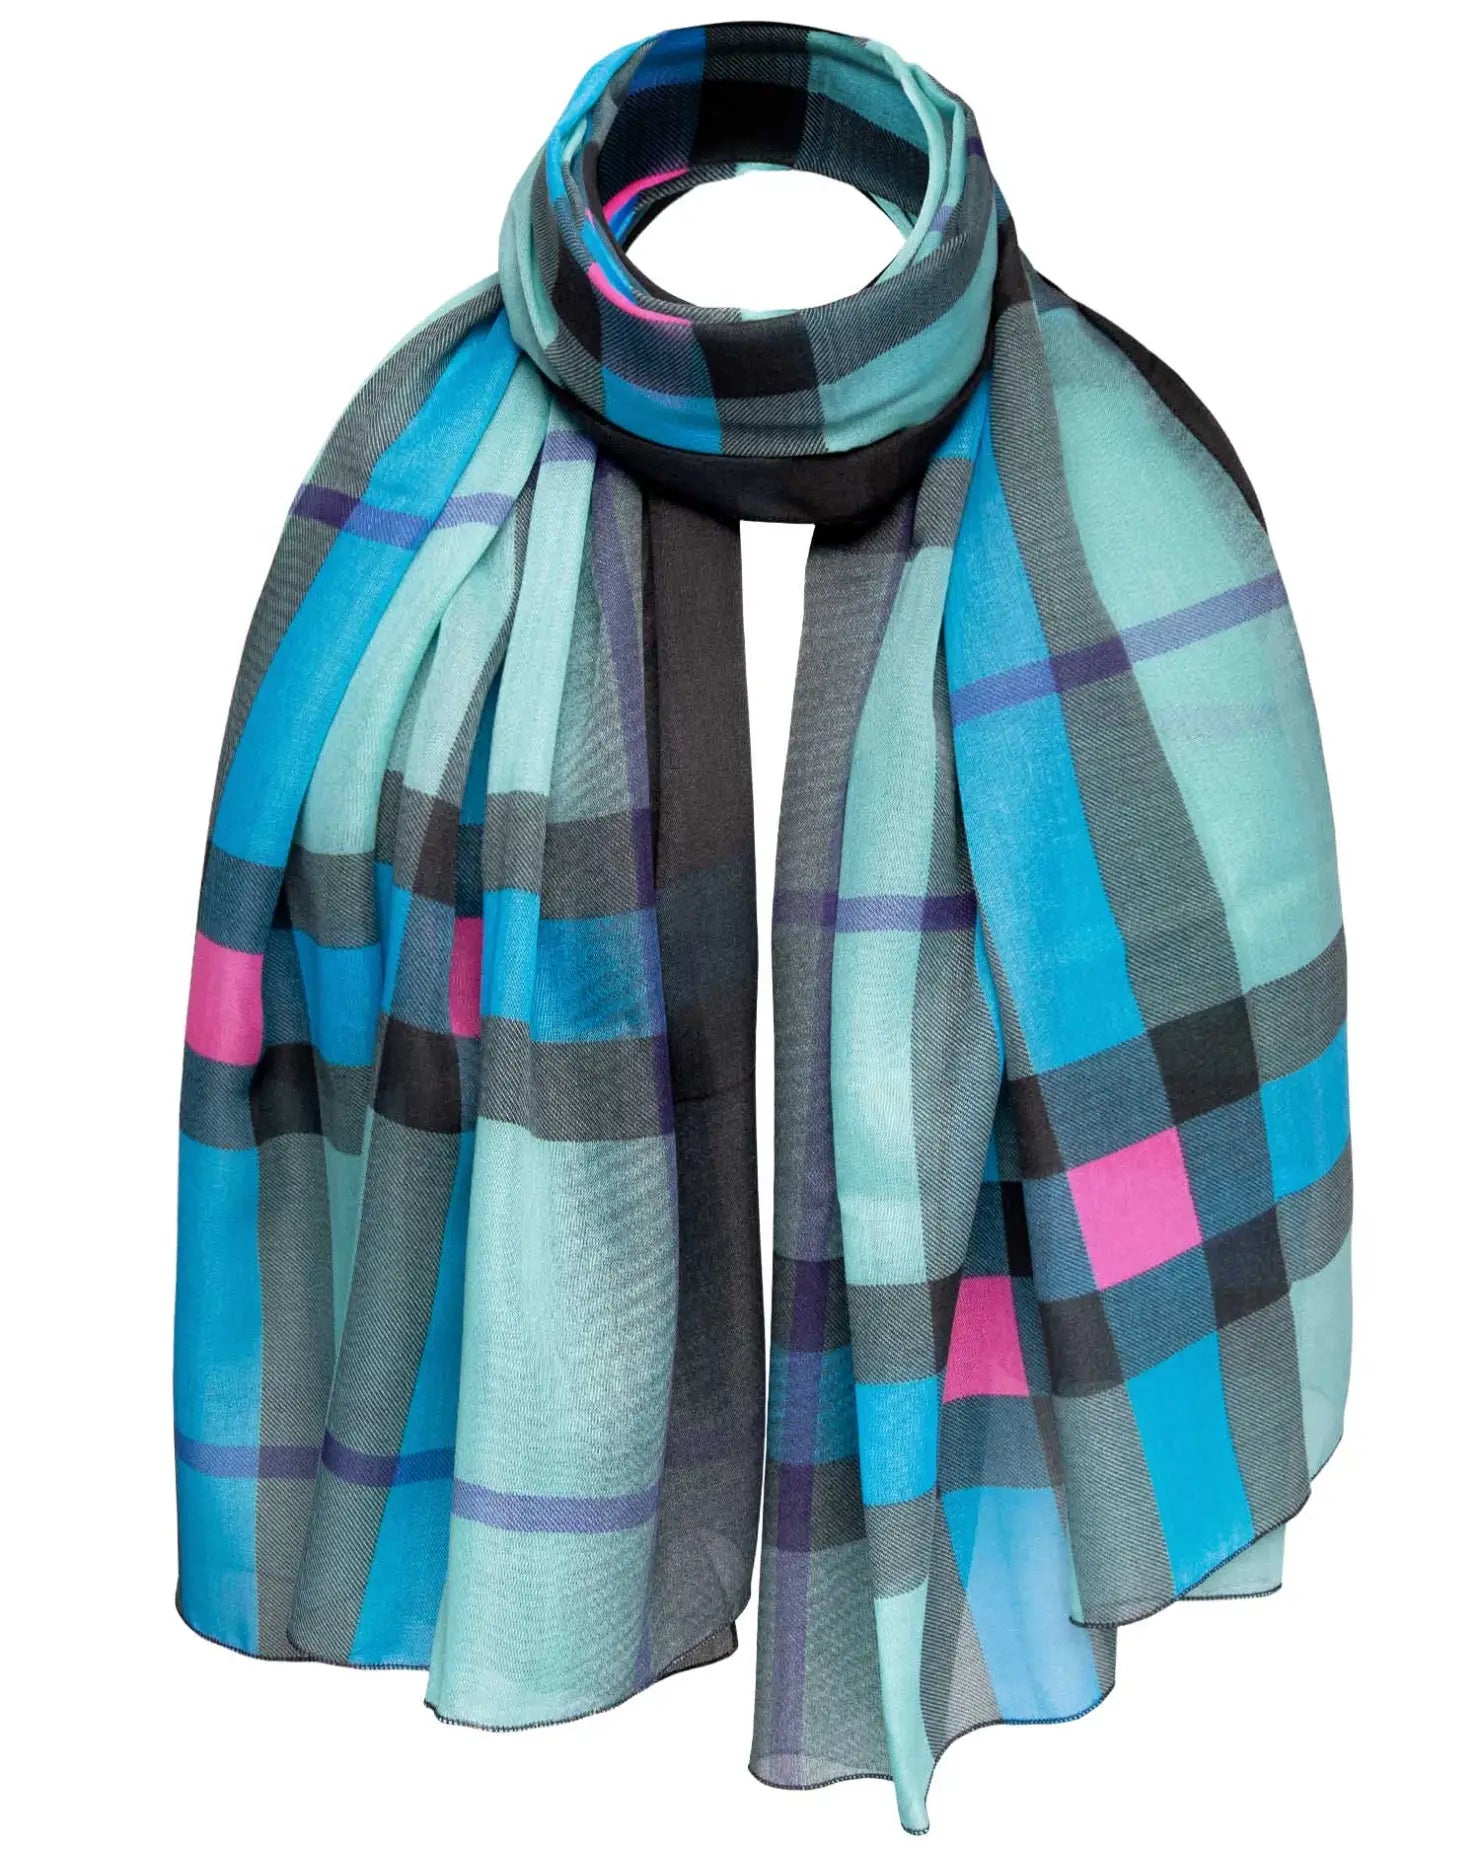 Ombre tartan oversized scarf in blue and pink plaid pattern